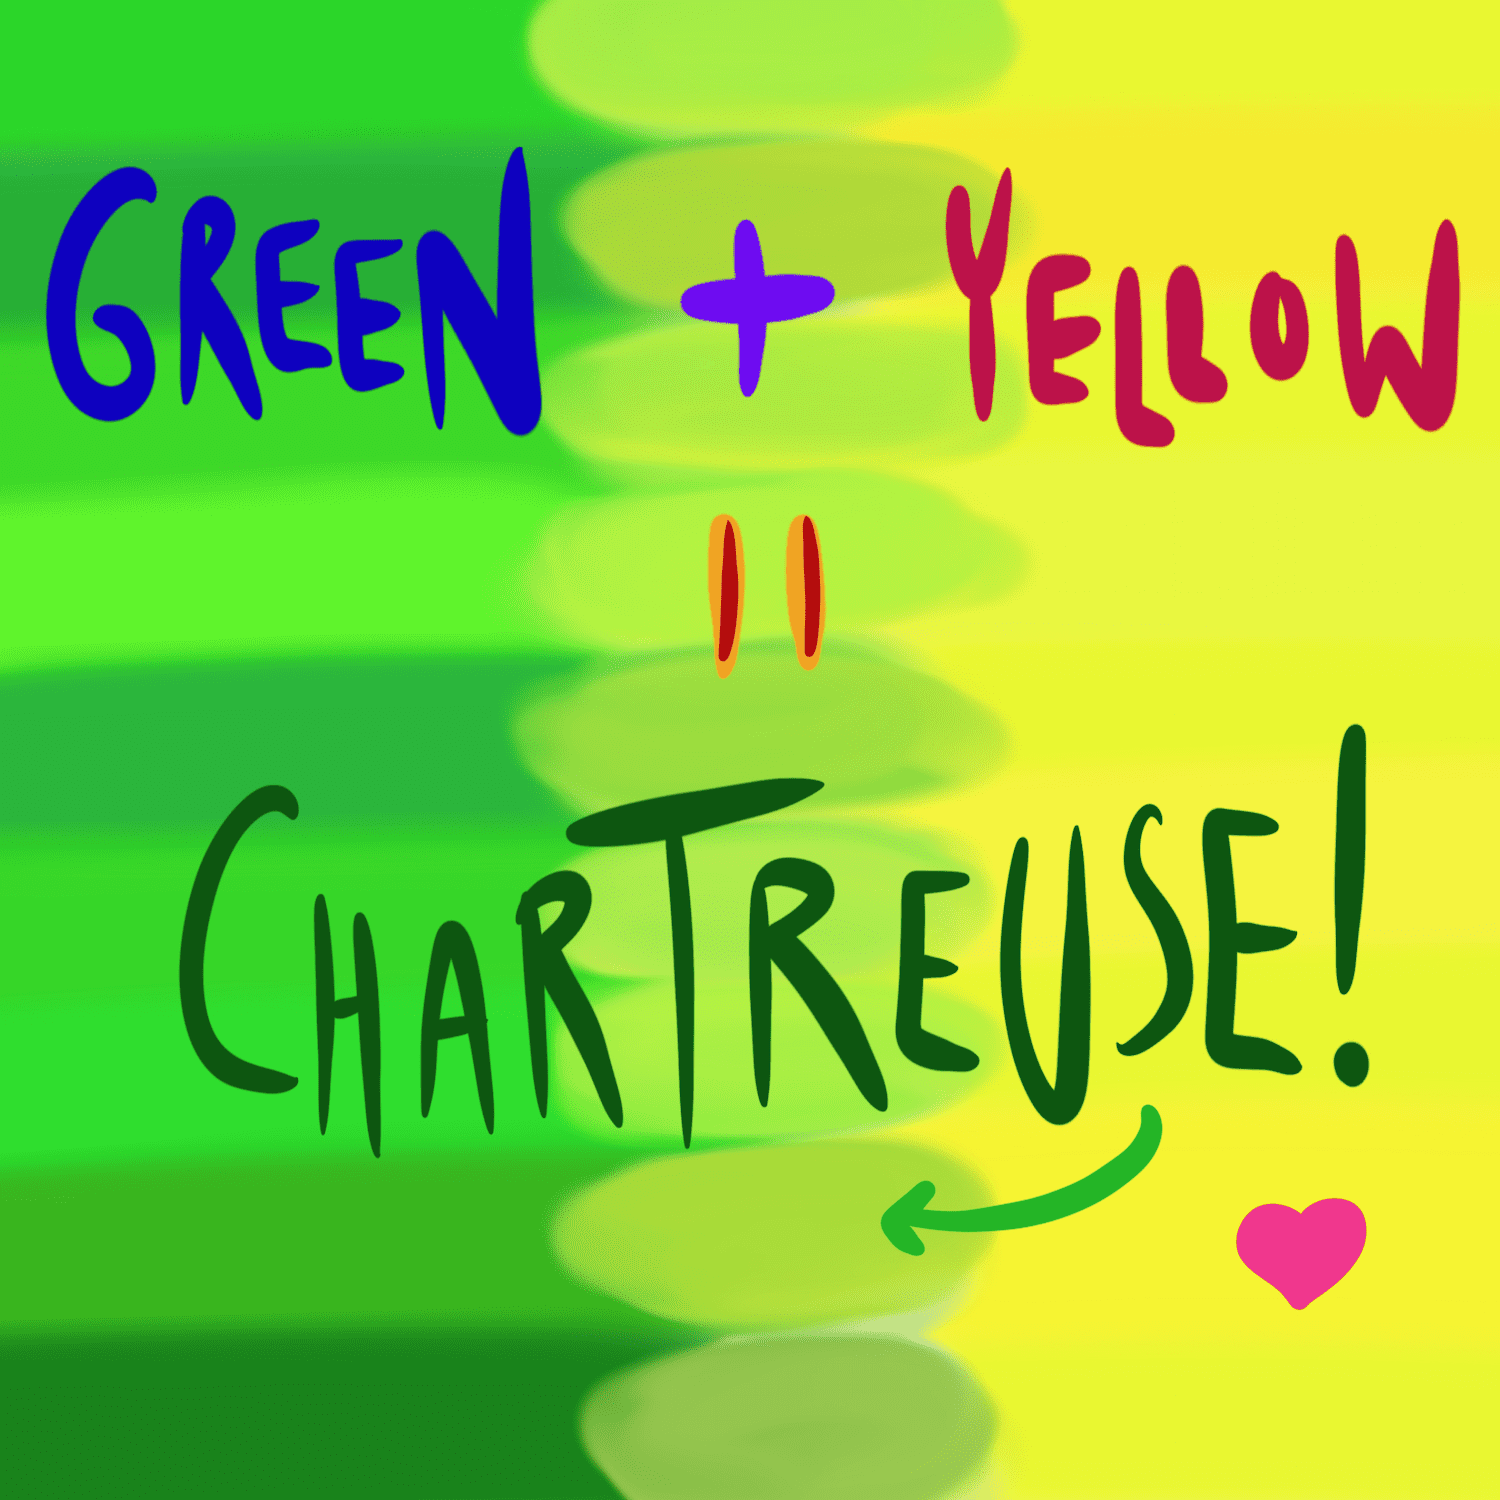 Yellow and green make the color chartreuse!